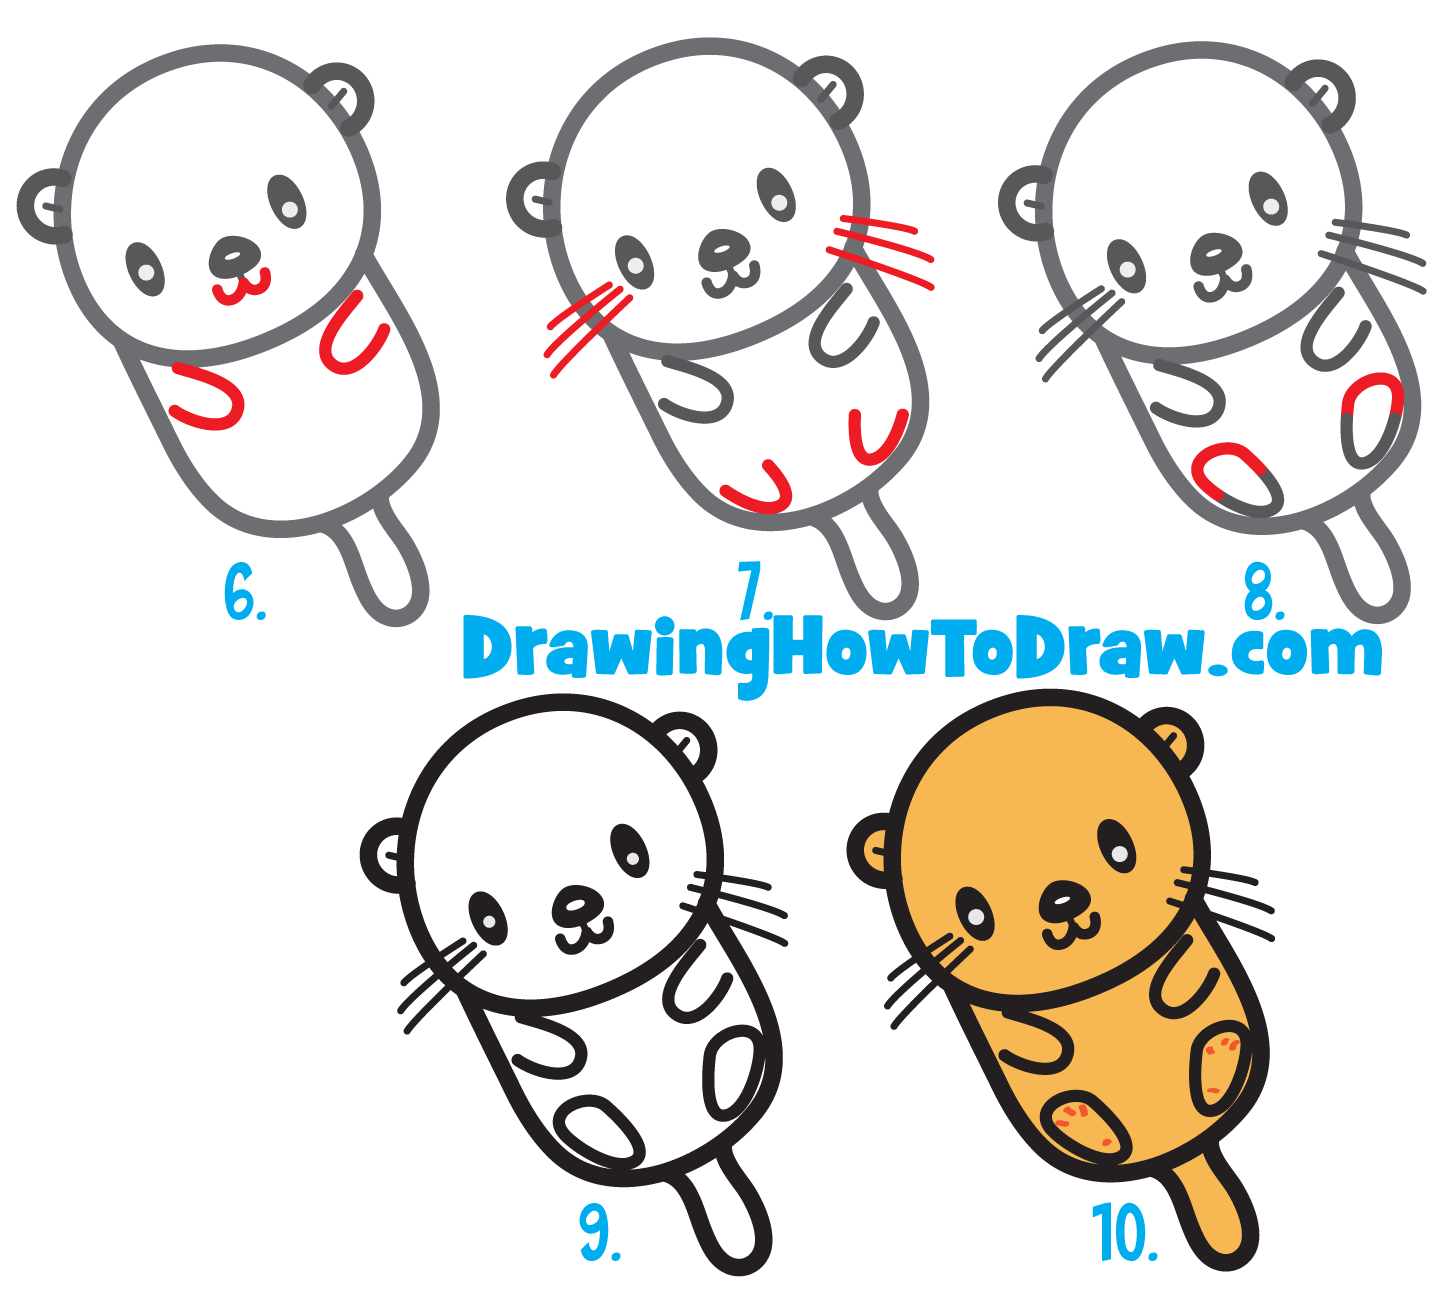 Learn How to Draw a Cute Kawaii / Chibi Cartoon Otter Floating Down the River Easy Step by Step Drawing Tutorial for Kids & Beginners